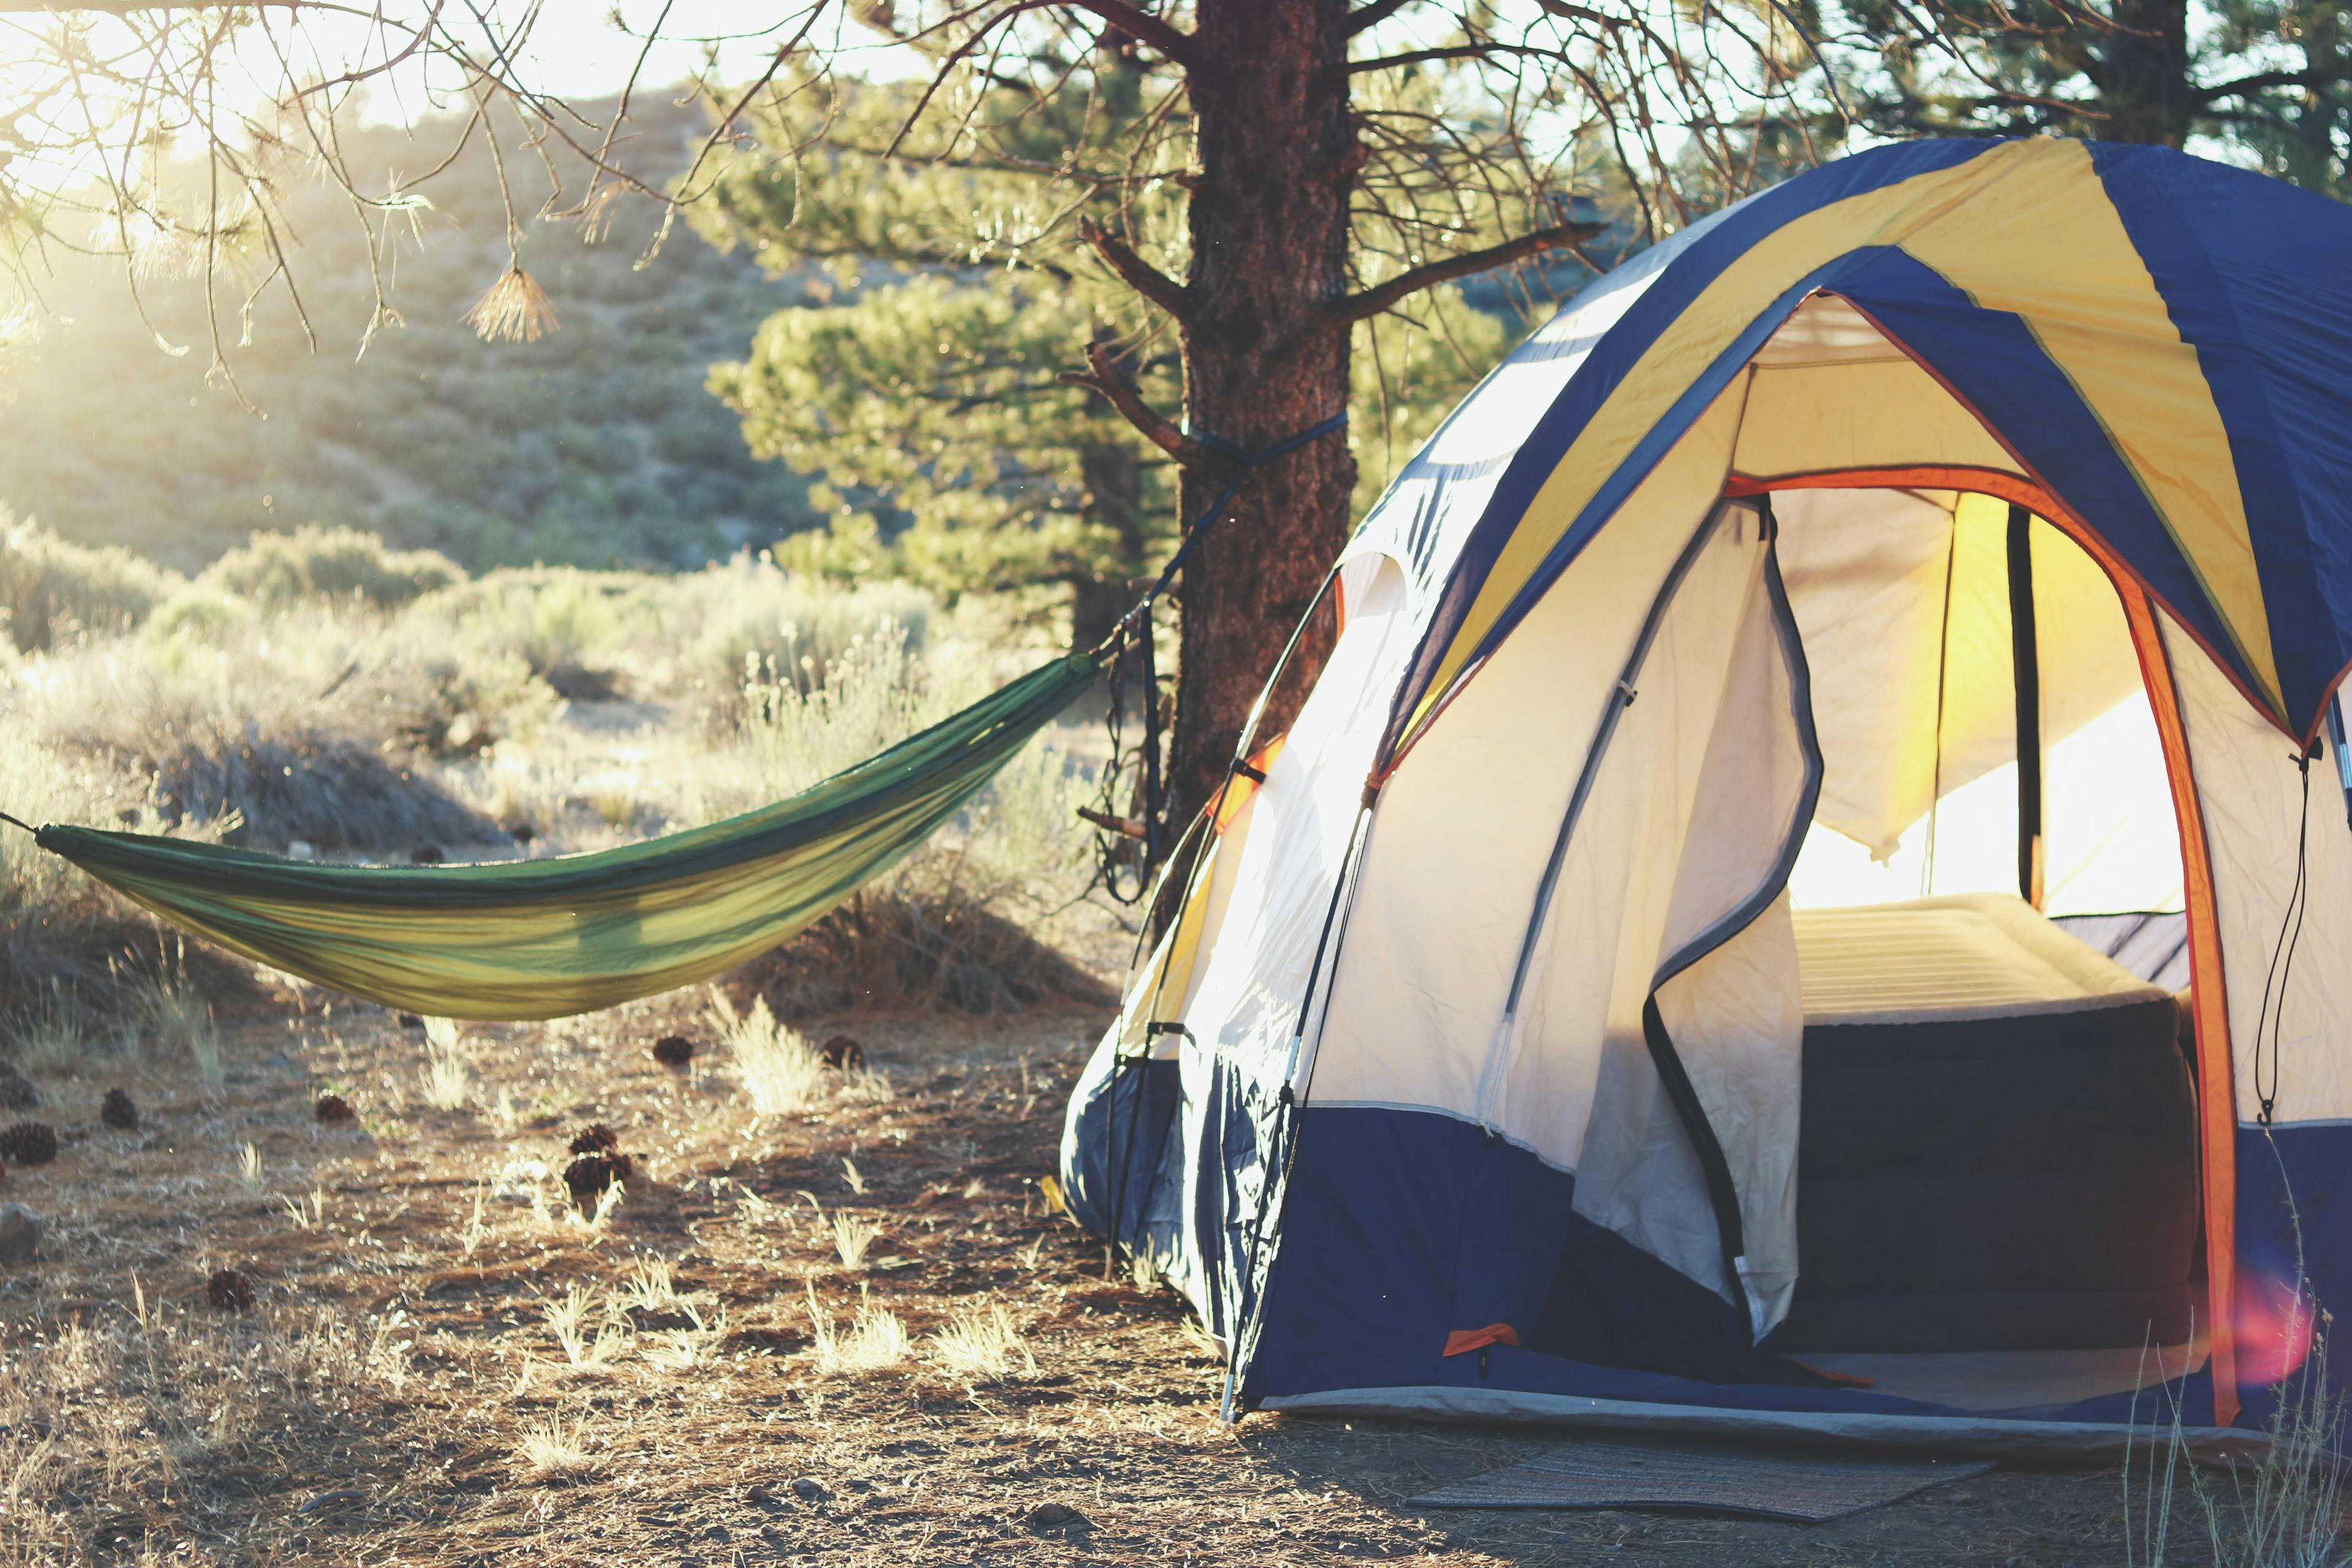 Camping tent and sleeping bags